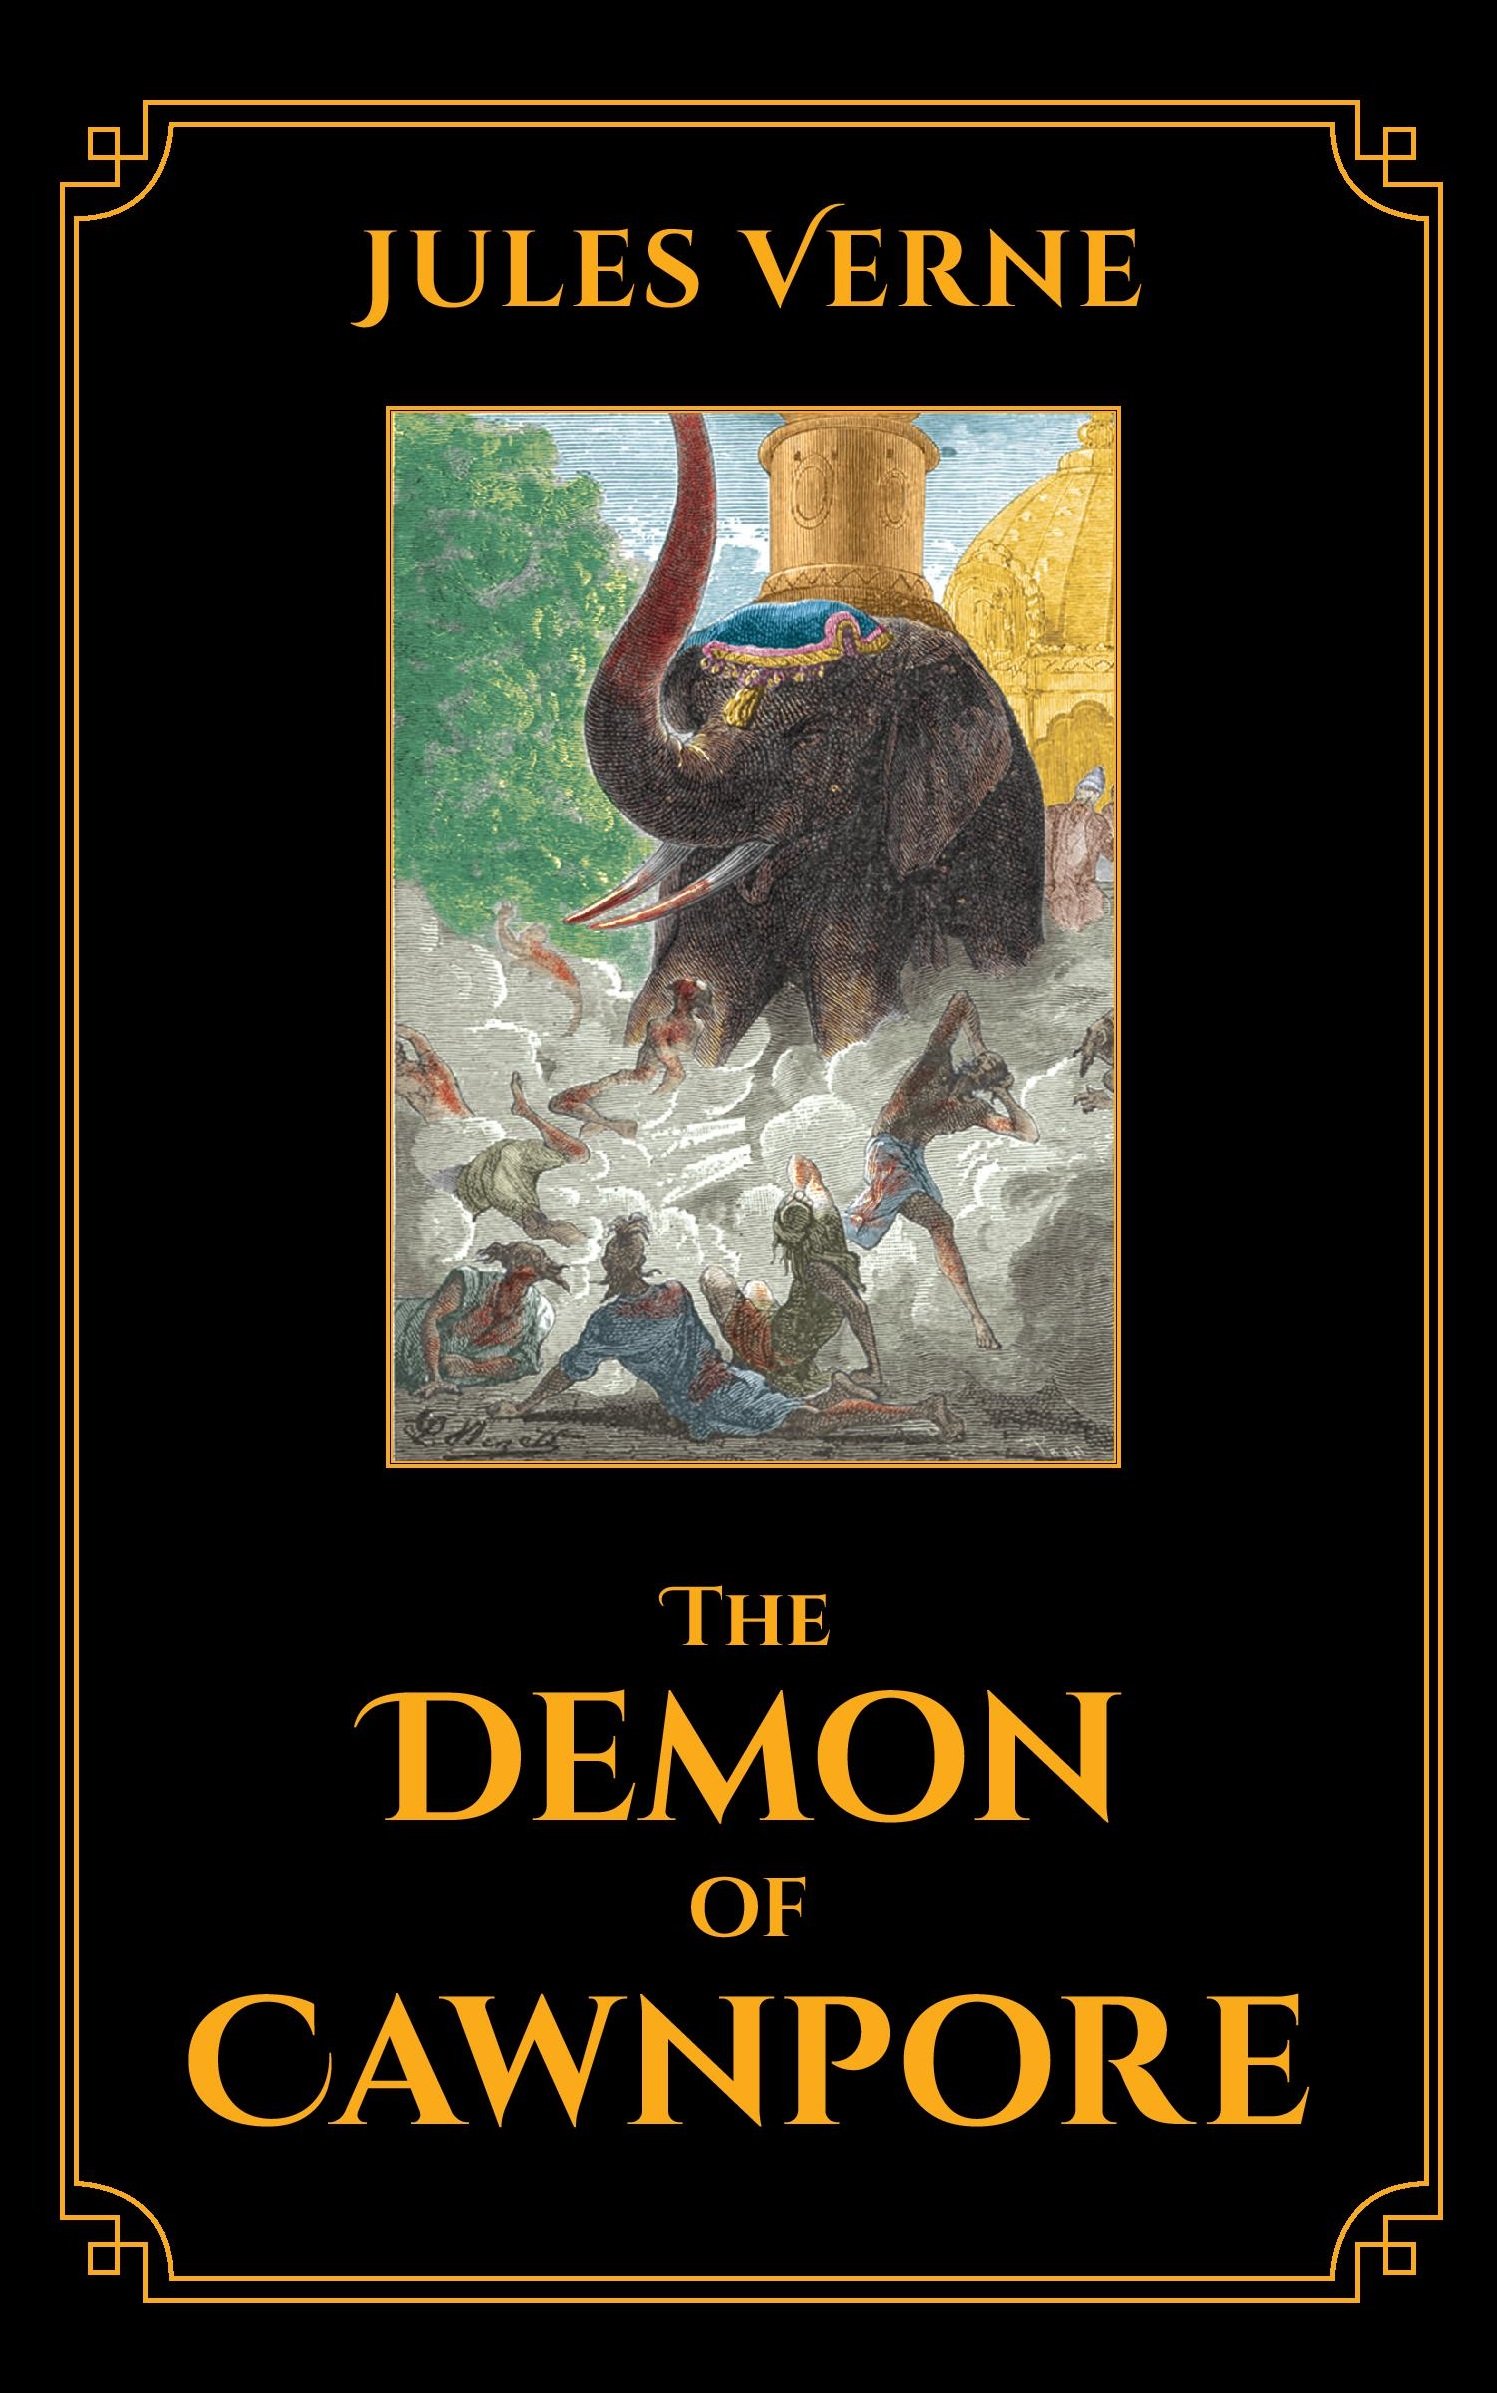 The Demon of Cawnpore